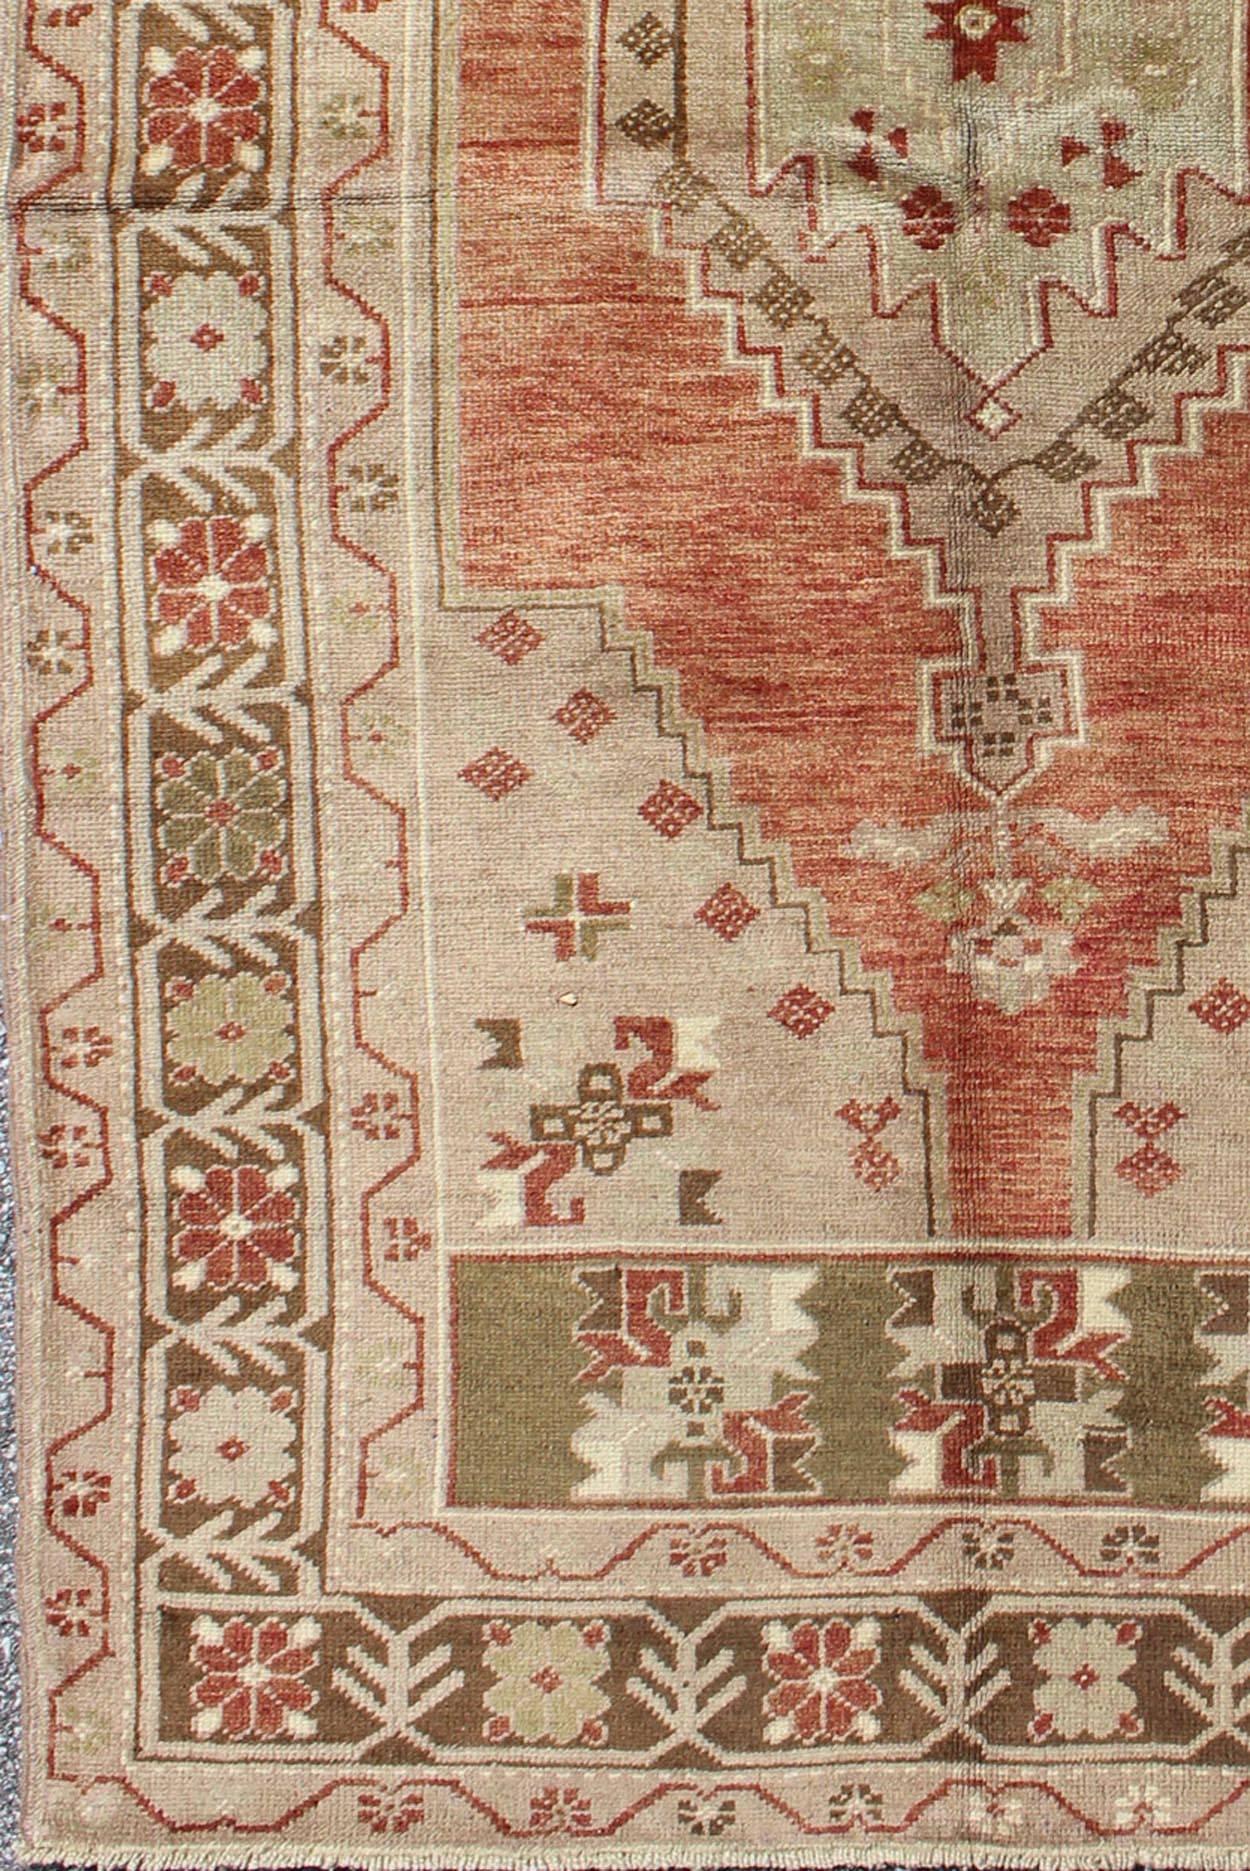 Vintage Oushak Rug from Turkey with Geometric Motifs Keivan Woven Arts/ rug#TU-DUR-3461, contents/ wool, hand knotted, origin/turkey, In excellent condition.

Measures: 3.5 x 6.1

This vintage Turkish Oushak rug features a unique blend of colors and